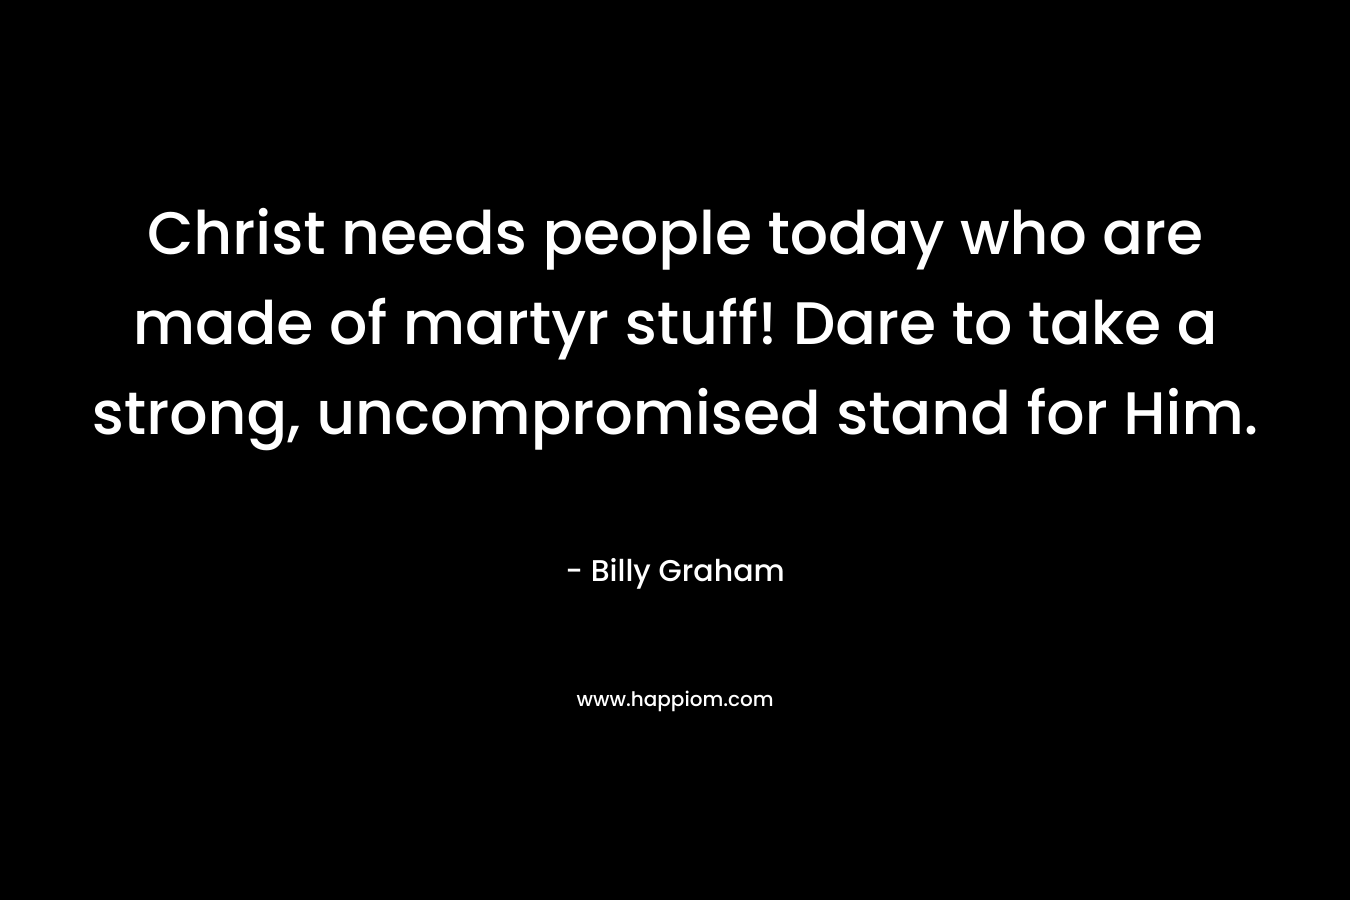 Christ needs people today who are made of martyr stuff! Dare to take a strong, uncompromised stand for Him. – Billy Graham